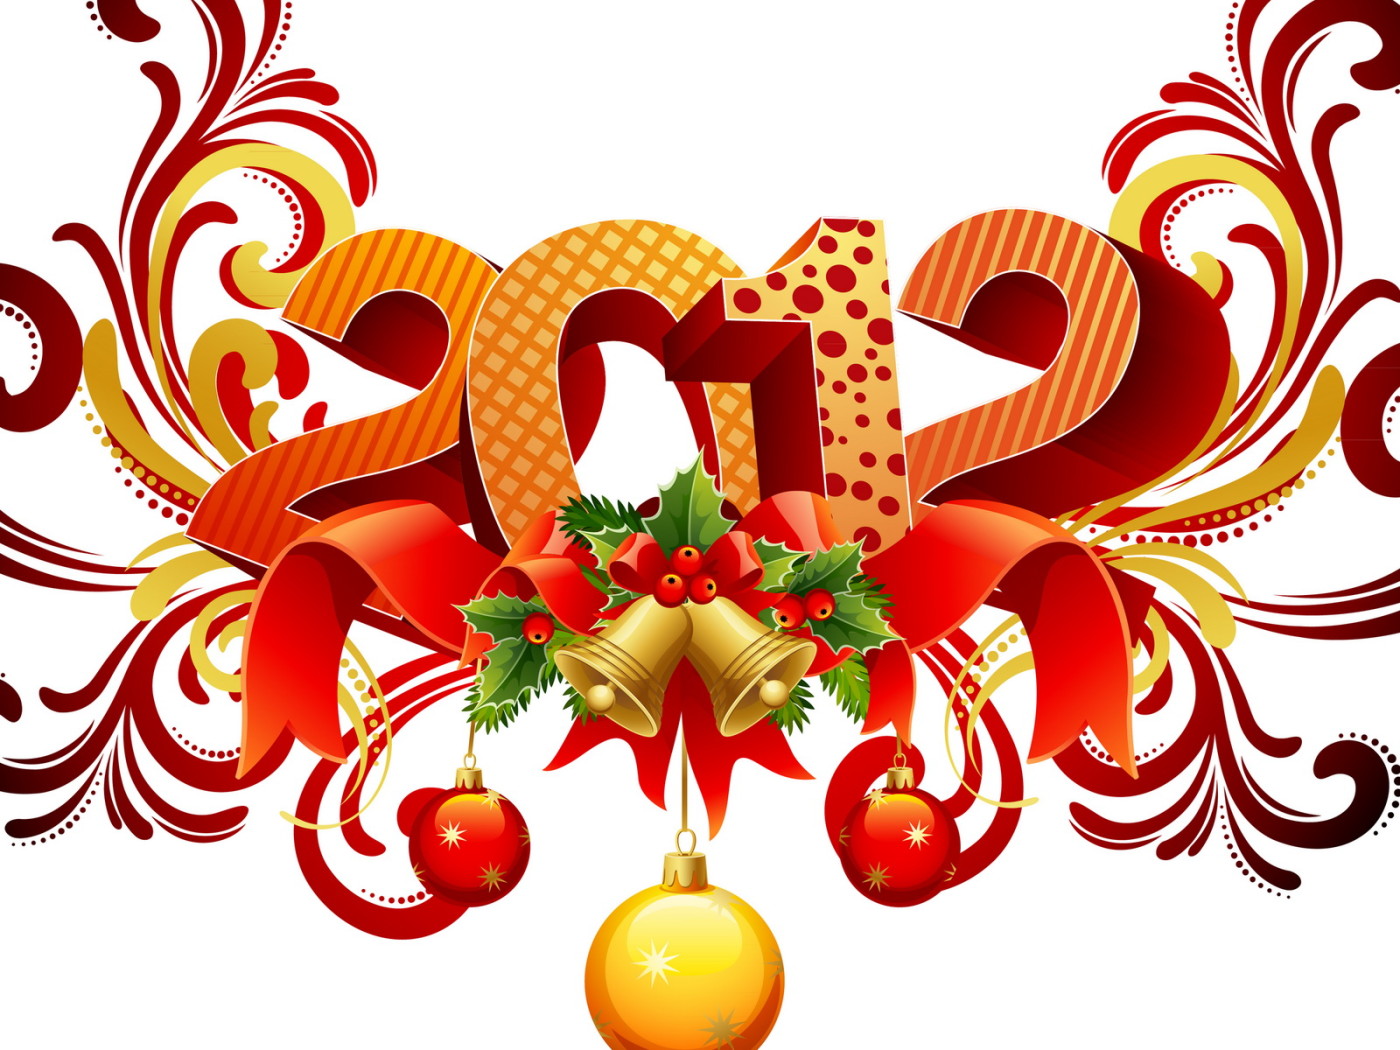 New Year 2012 High Quality Images and Wallpapers-15 1